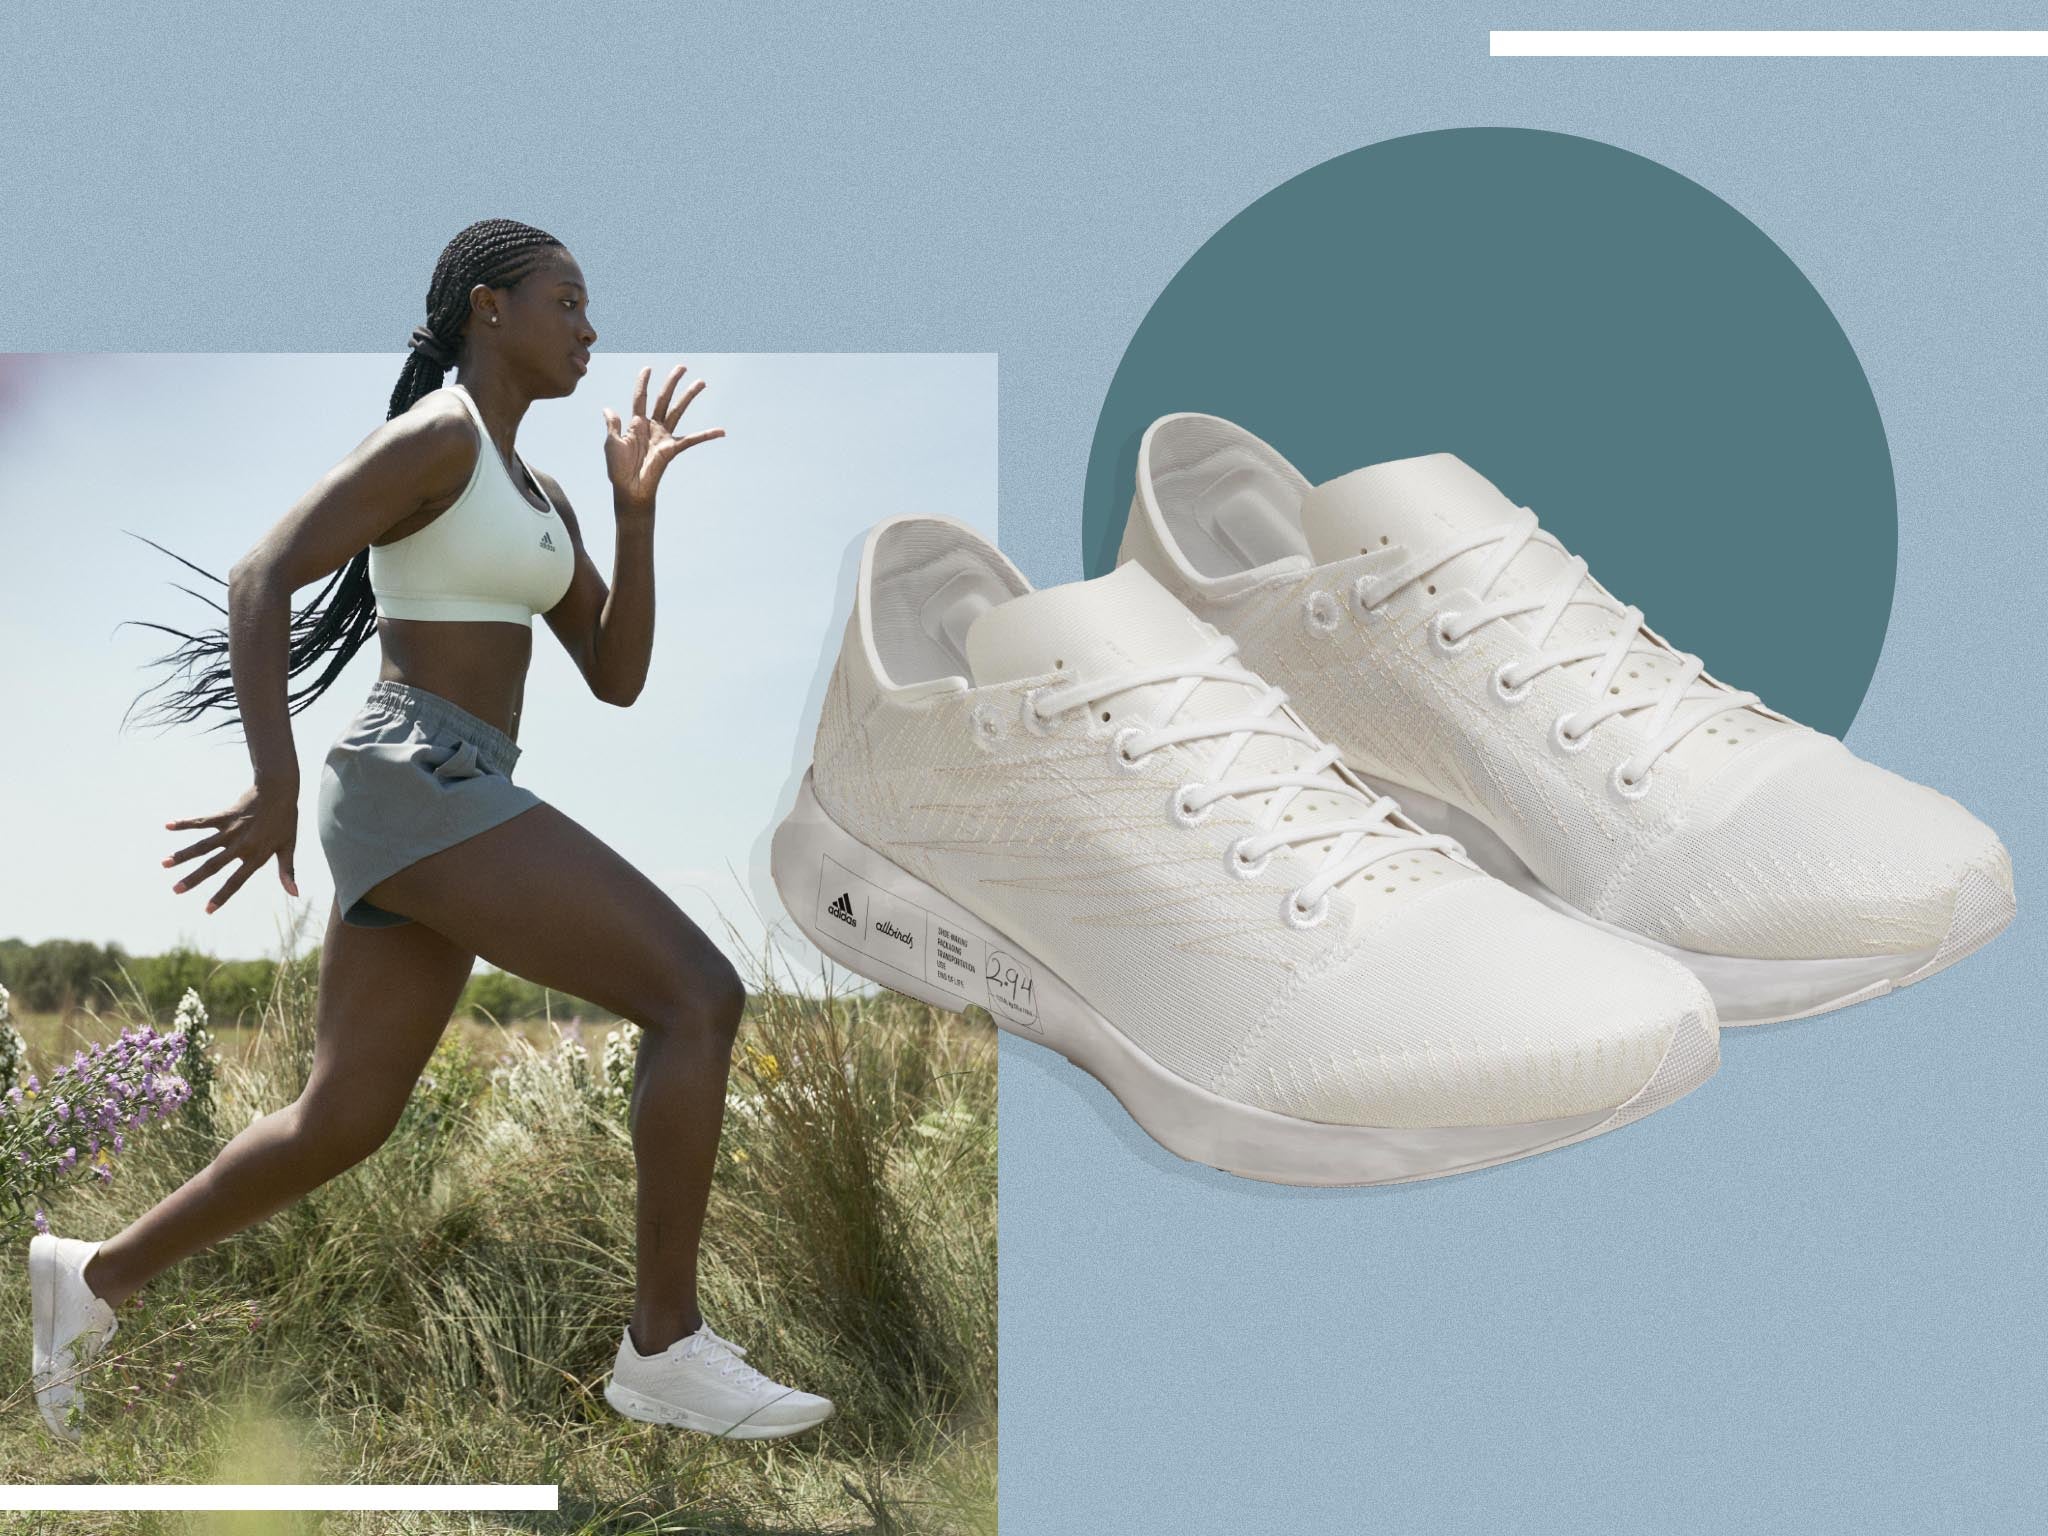 With less than 3kg CO2e per pair, could this be the future of sustainable sneaks?